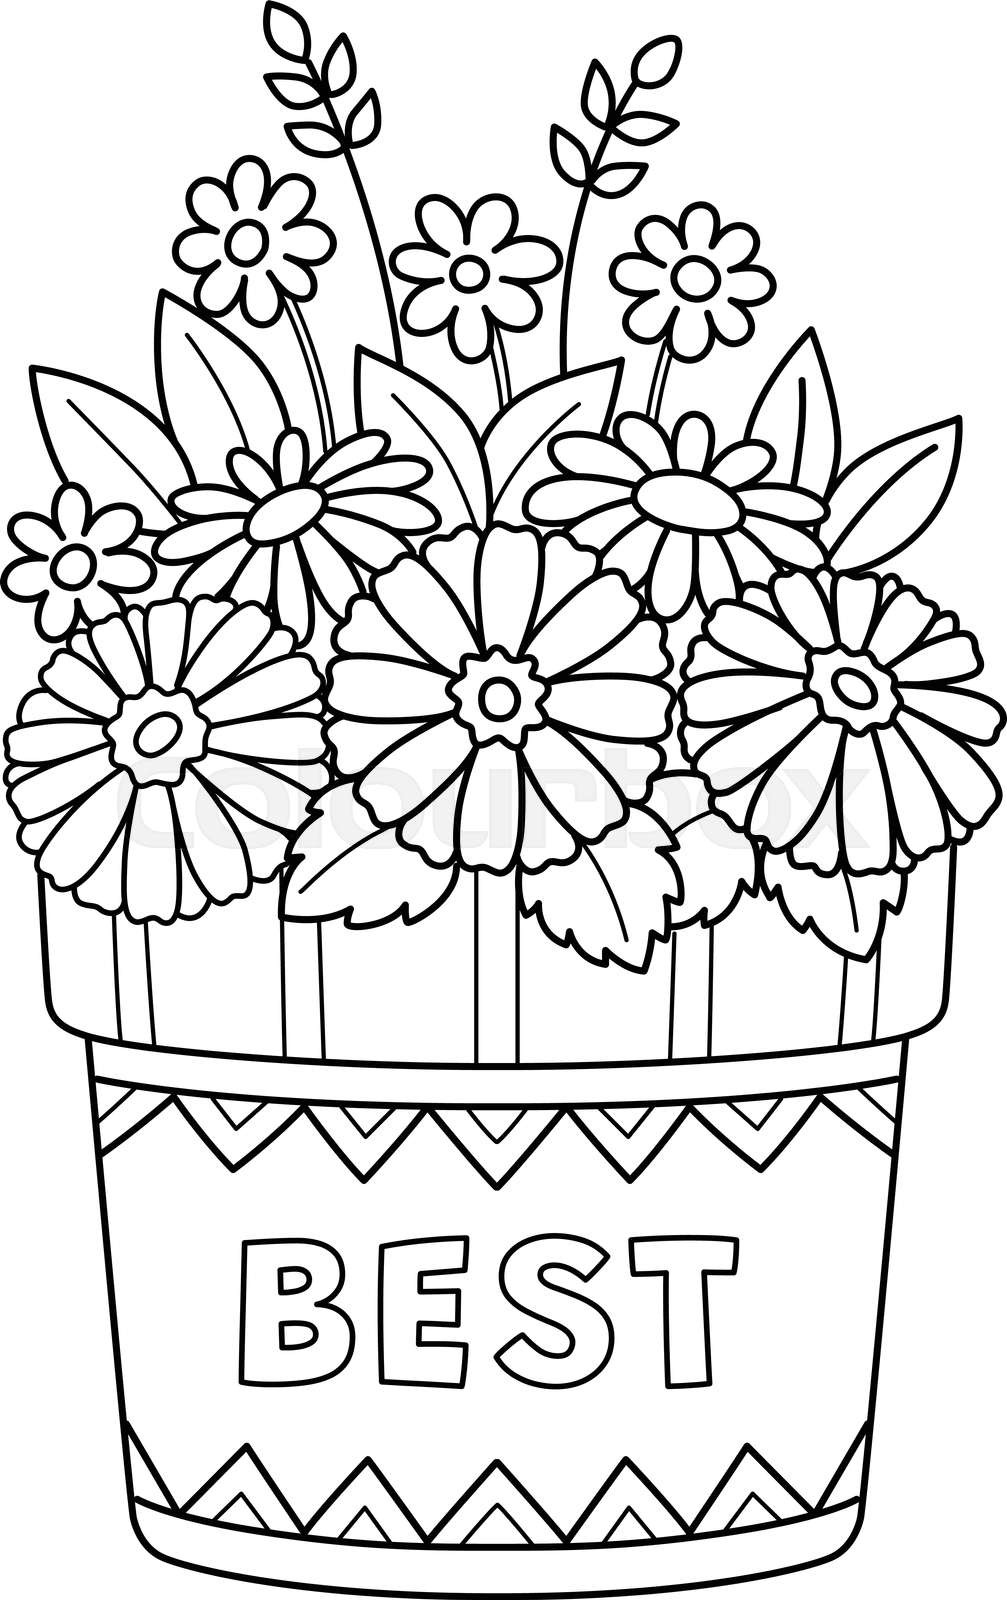 Flower pot isolated coloring page for kids stock vector